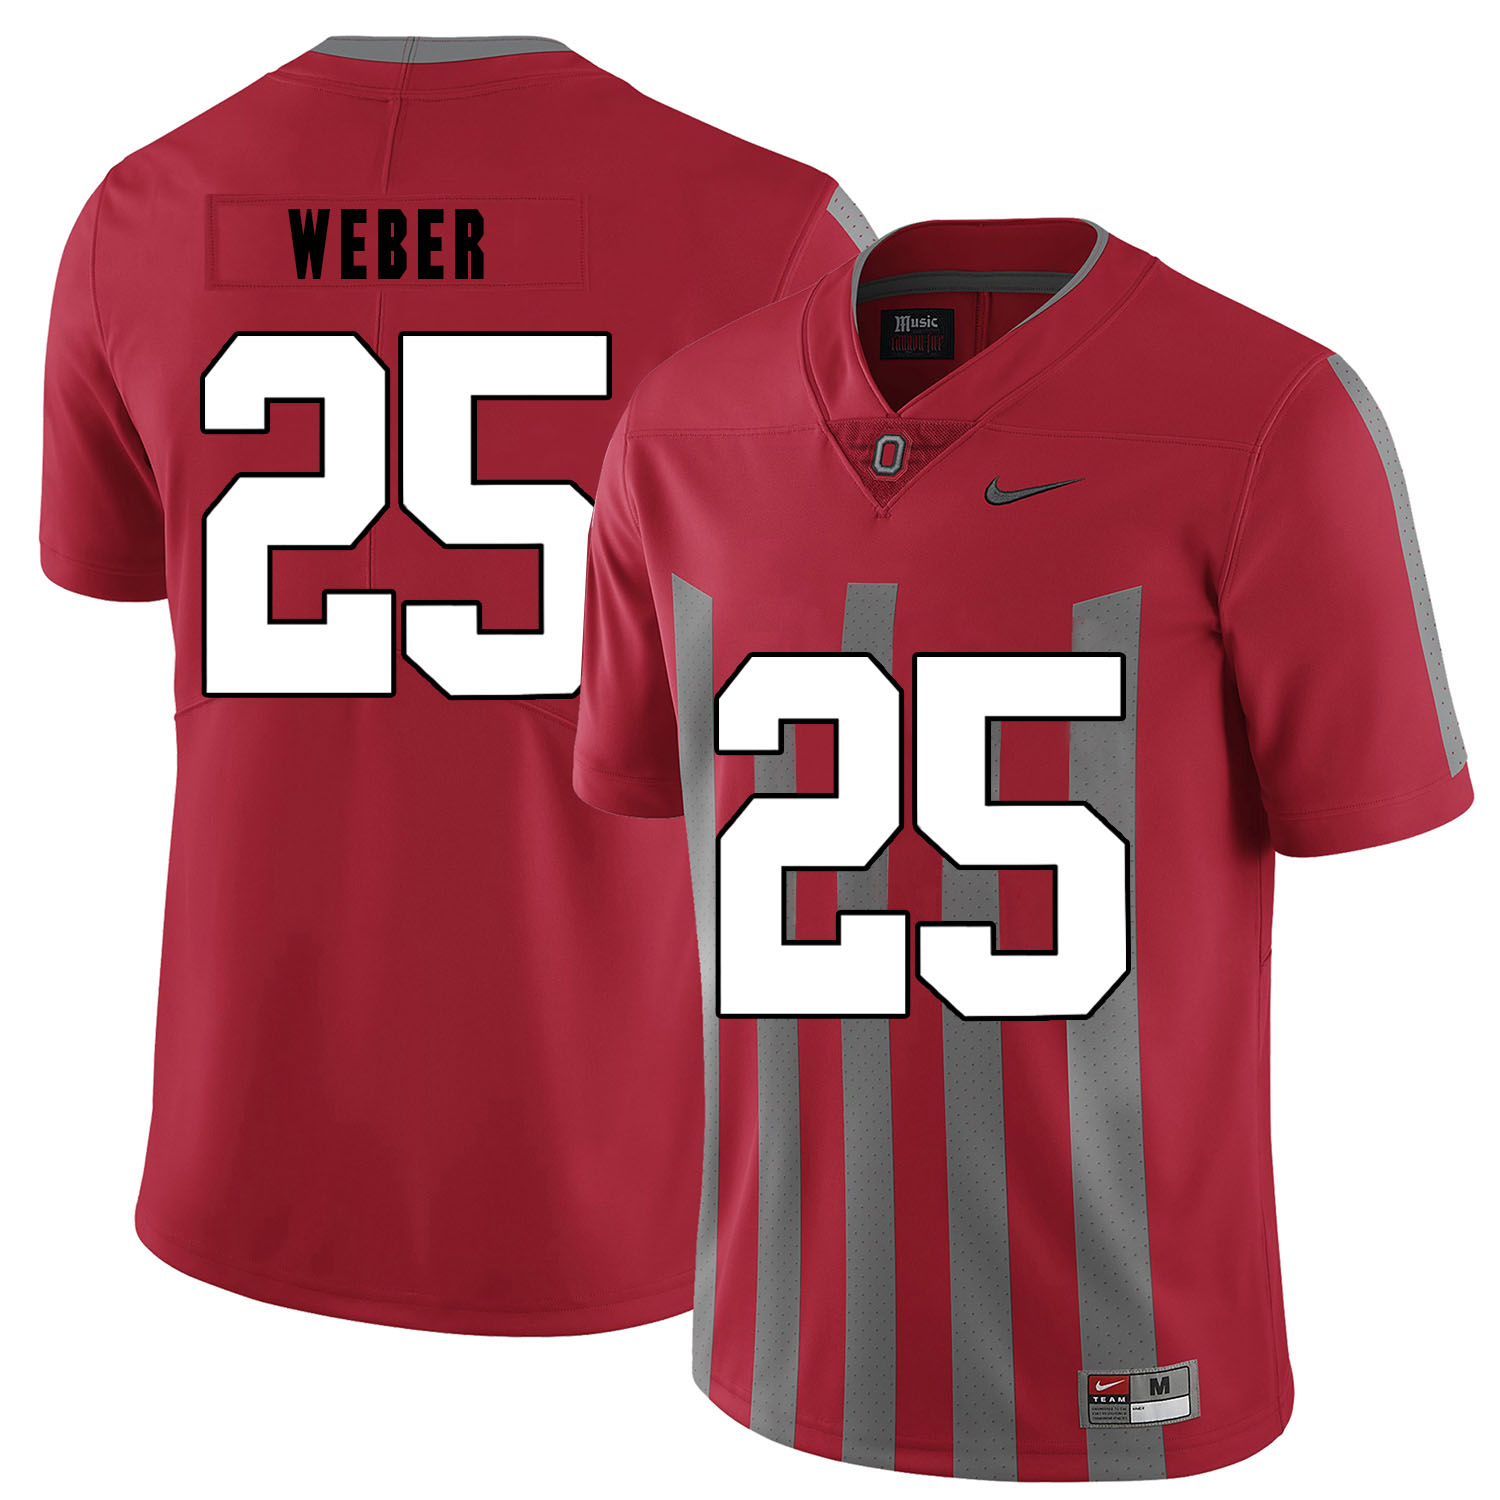 Ohio State Buckeyes 25 Mike Weber Red Elite Nike College Football Jersey